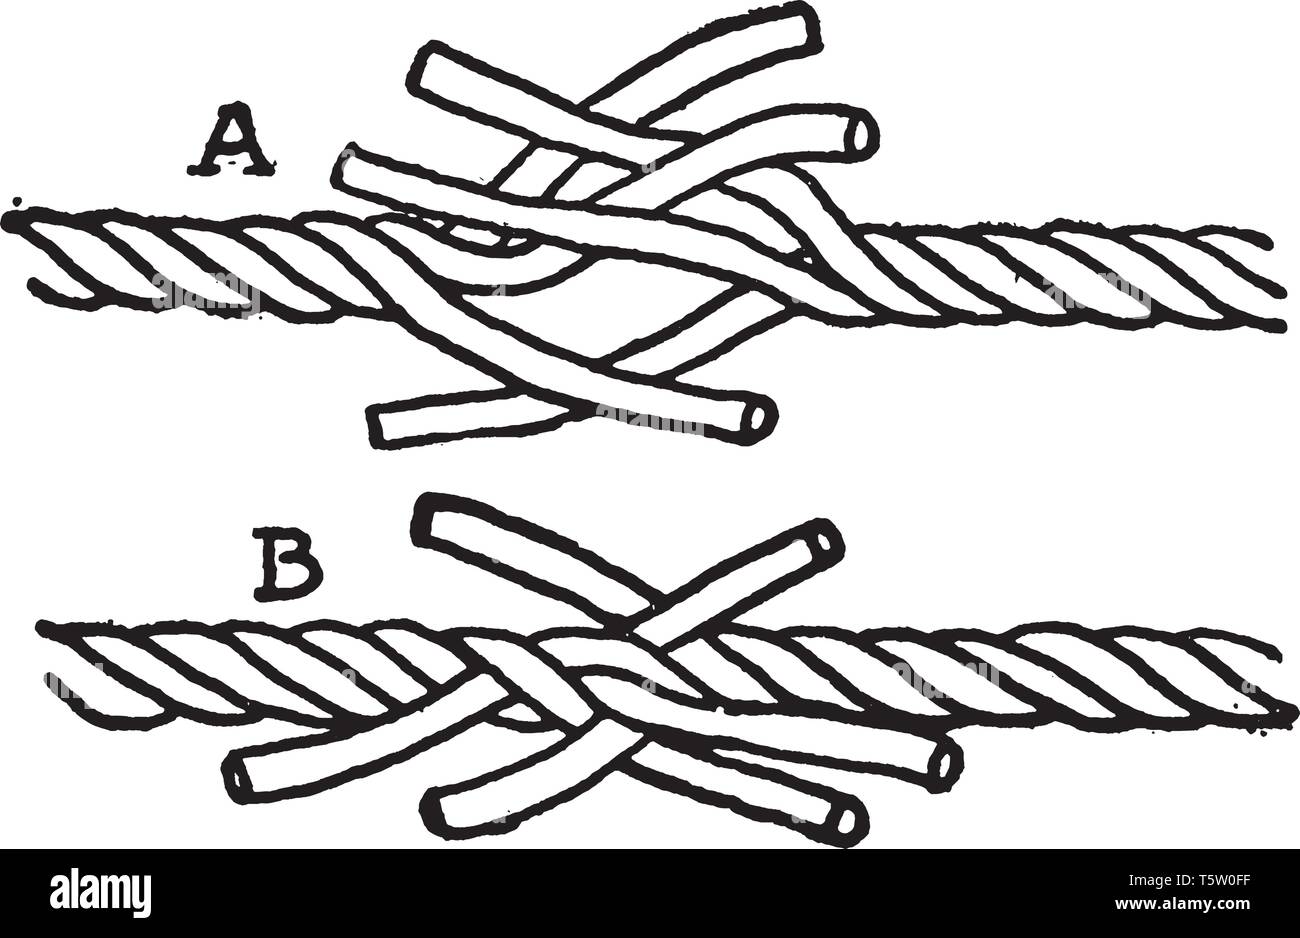 Short splice the ends of the ropes are unlaid for a short distance and brought together, vintage line drawing or engraving illustration. Stock Vector